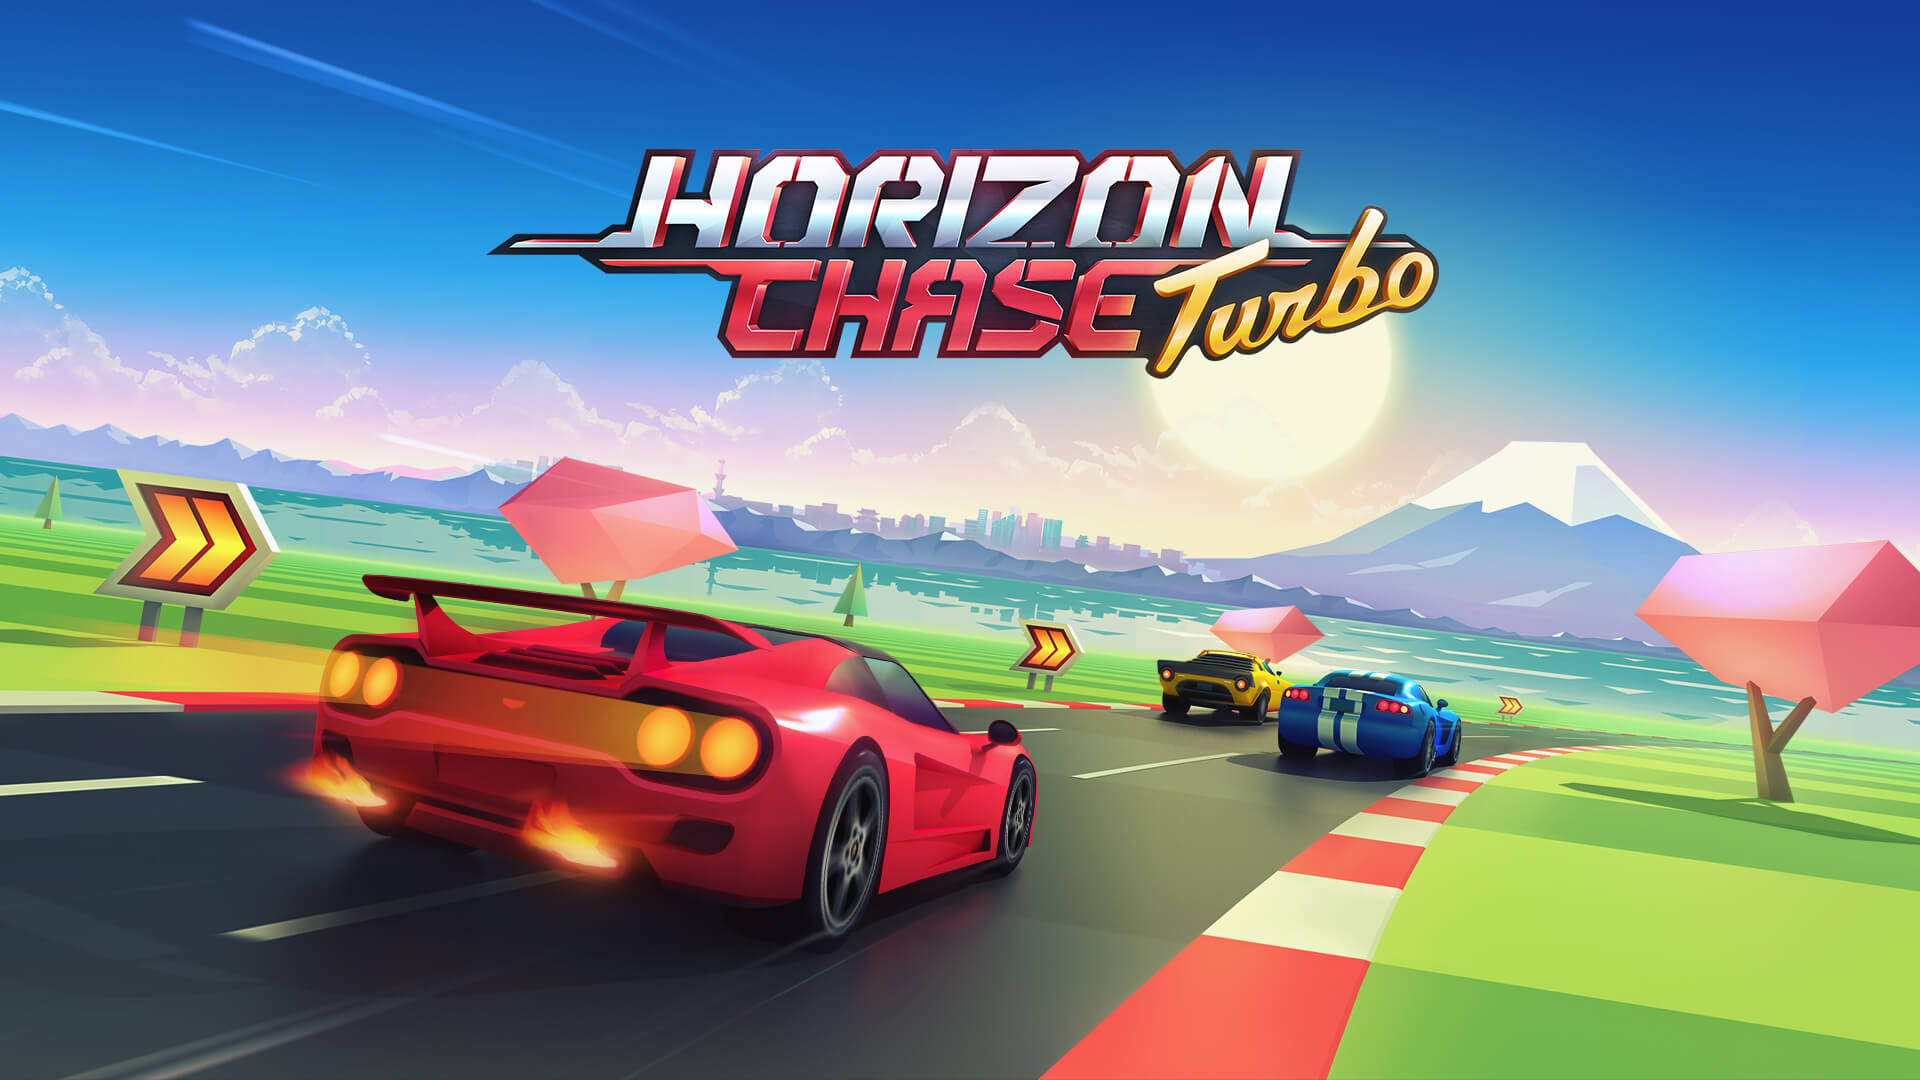 Horizon Chase Turbo Game now free for a limited time